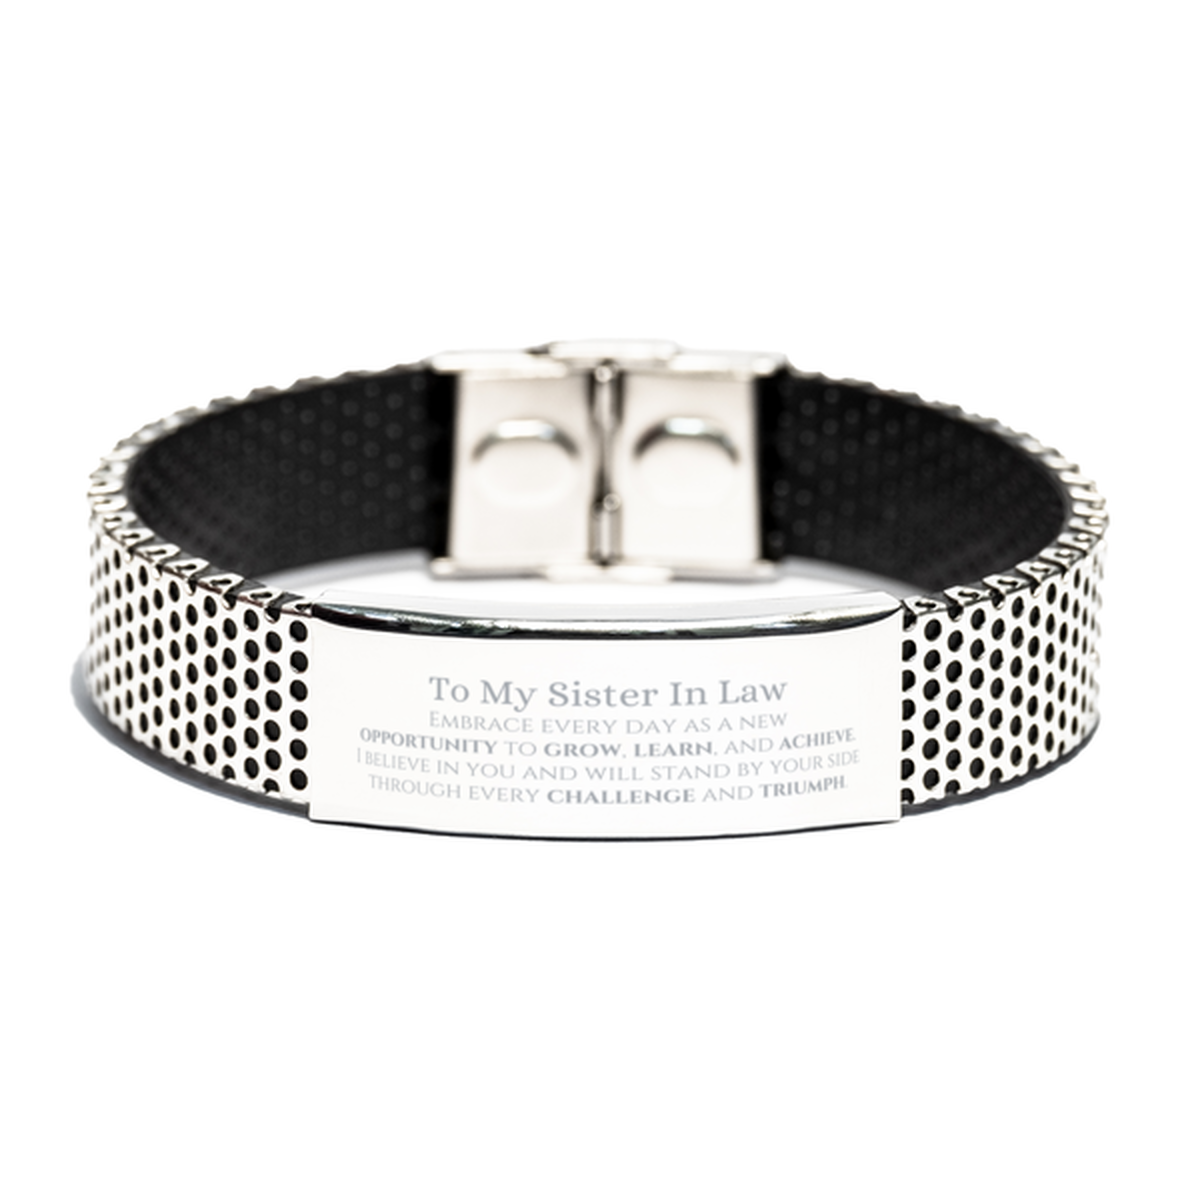 To My Sister In Law Gifts, I believe in you and will stand by your side, Inspirational Stainless Steel Bracelet For Sister In Law, Birthday Christmas Motivational Sister In Law Gifts